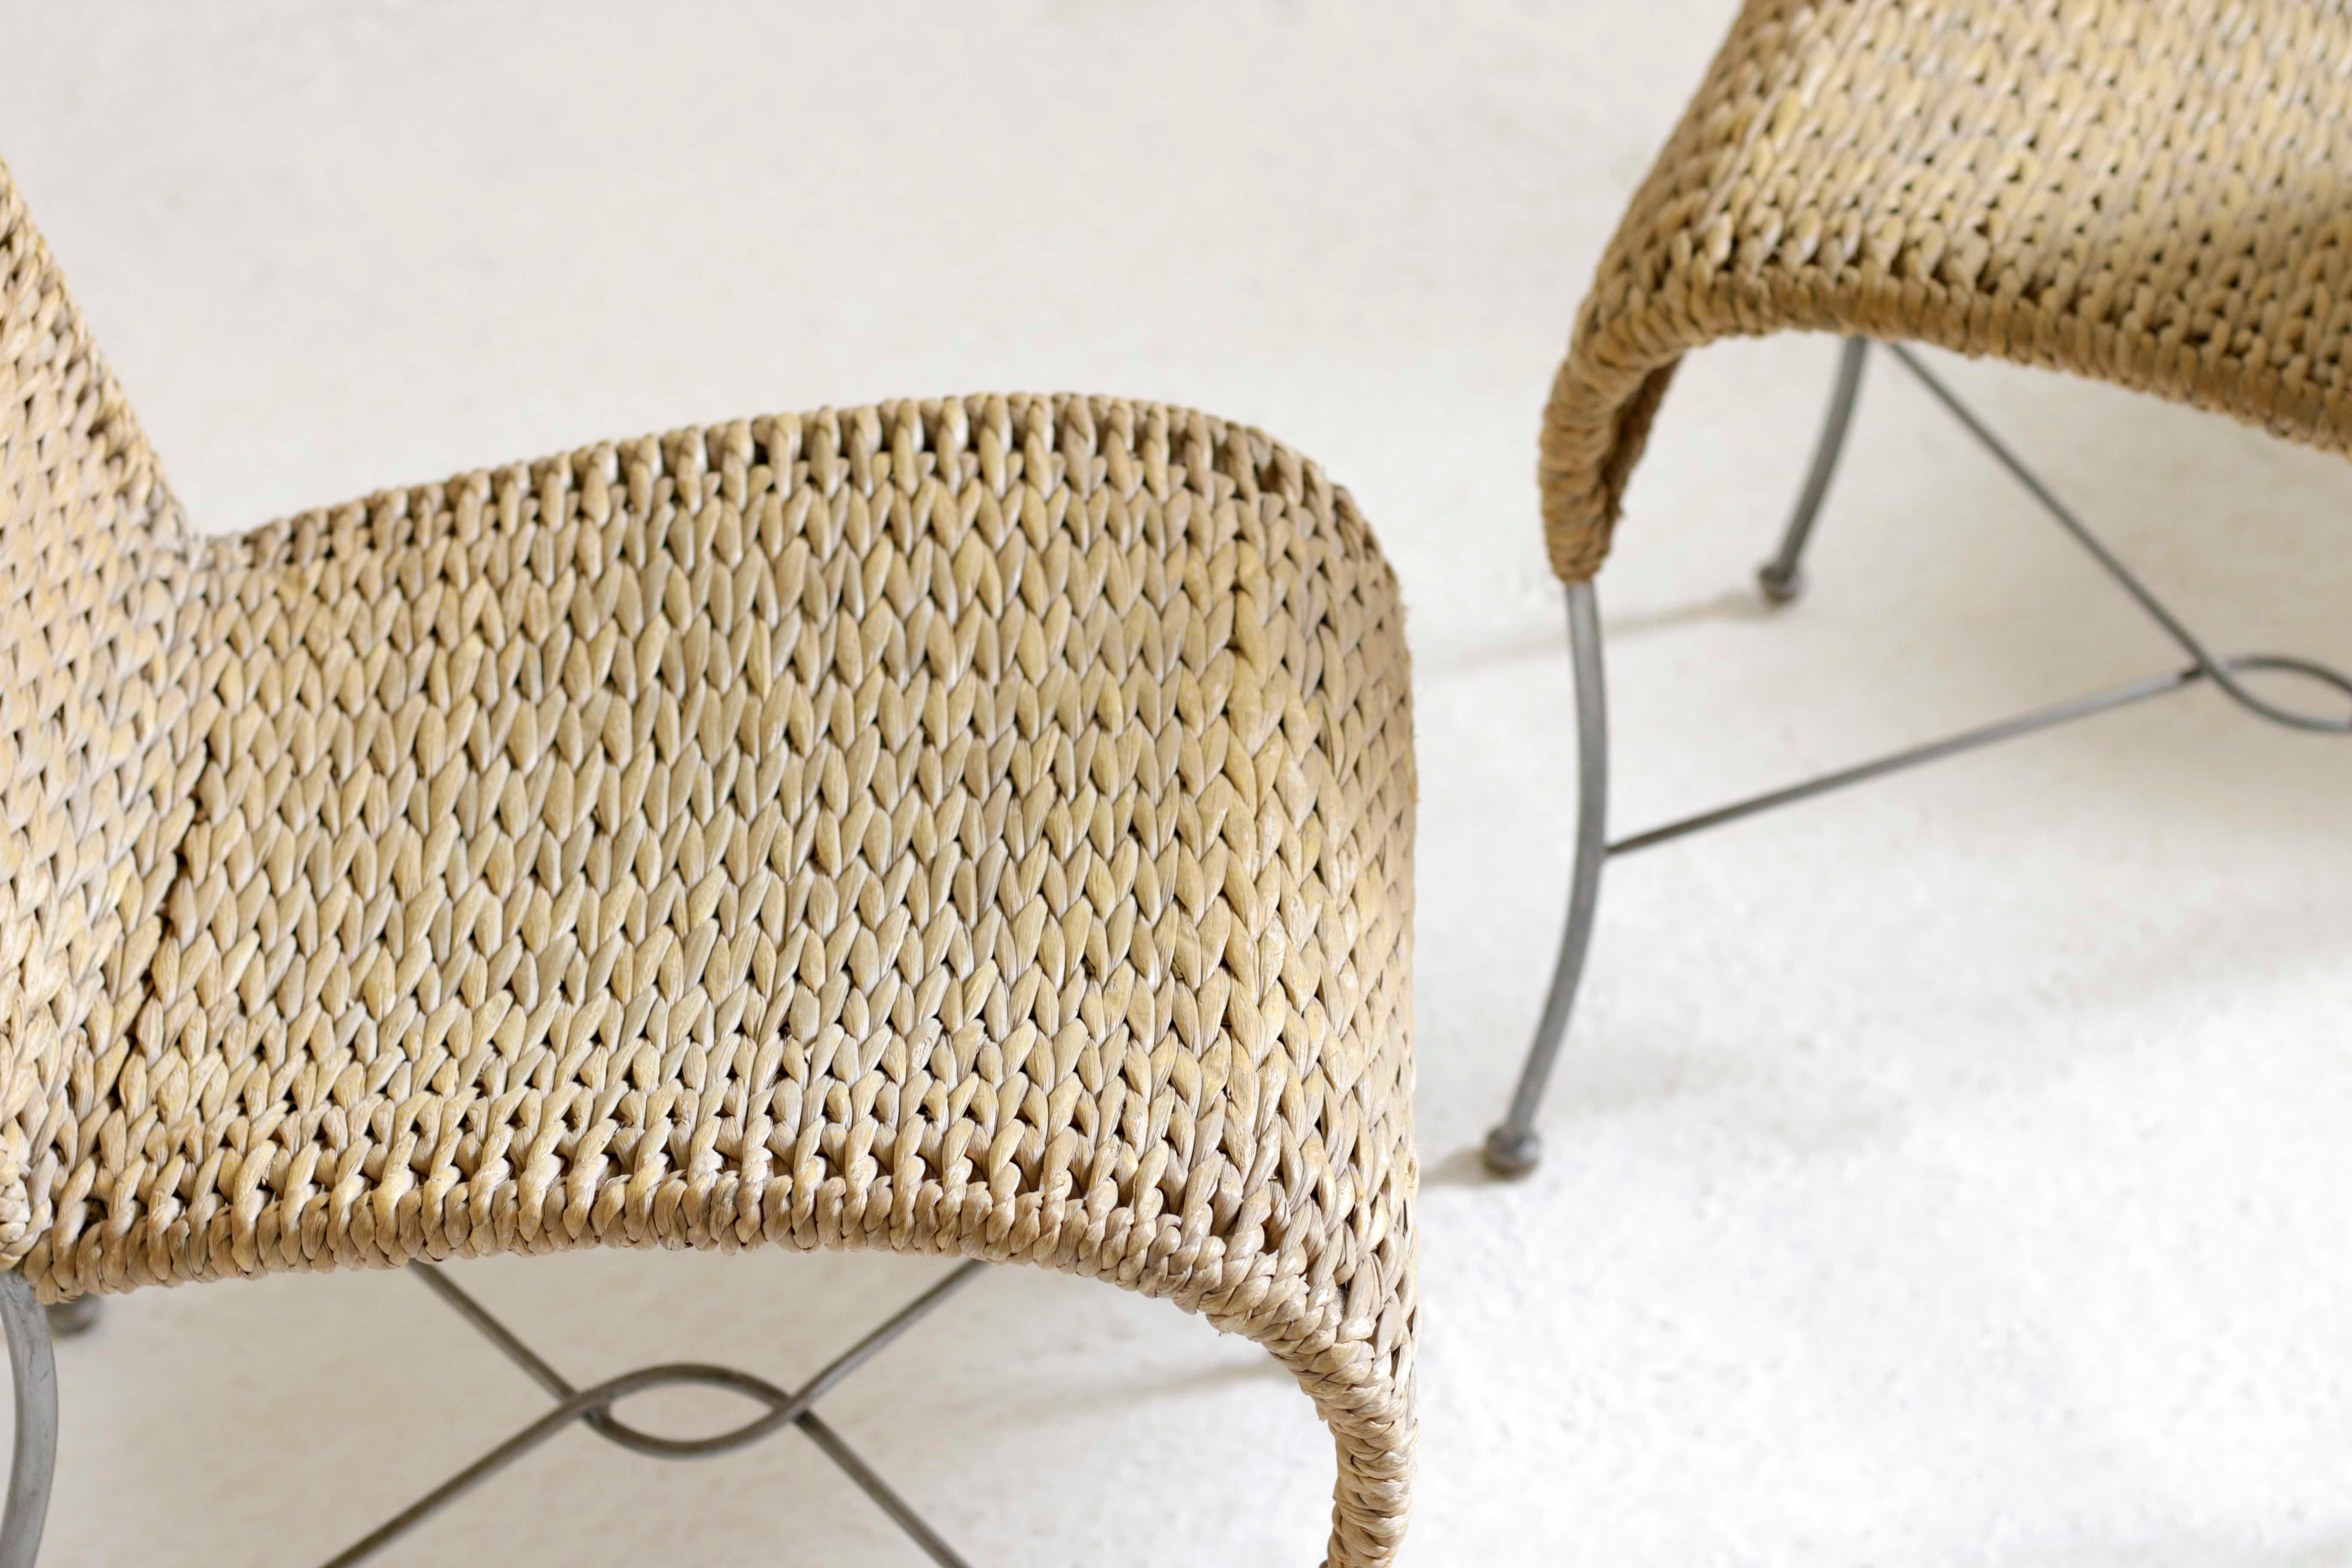 British Set of 4 Conran Shop Woven Seagrass Chairs with Rams Horn Details